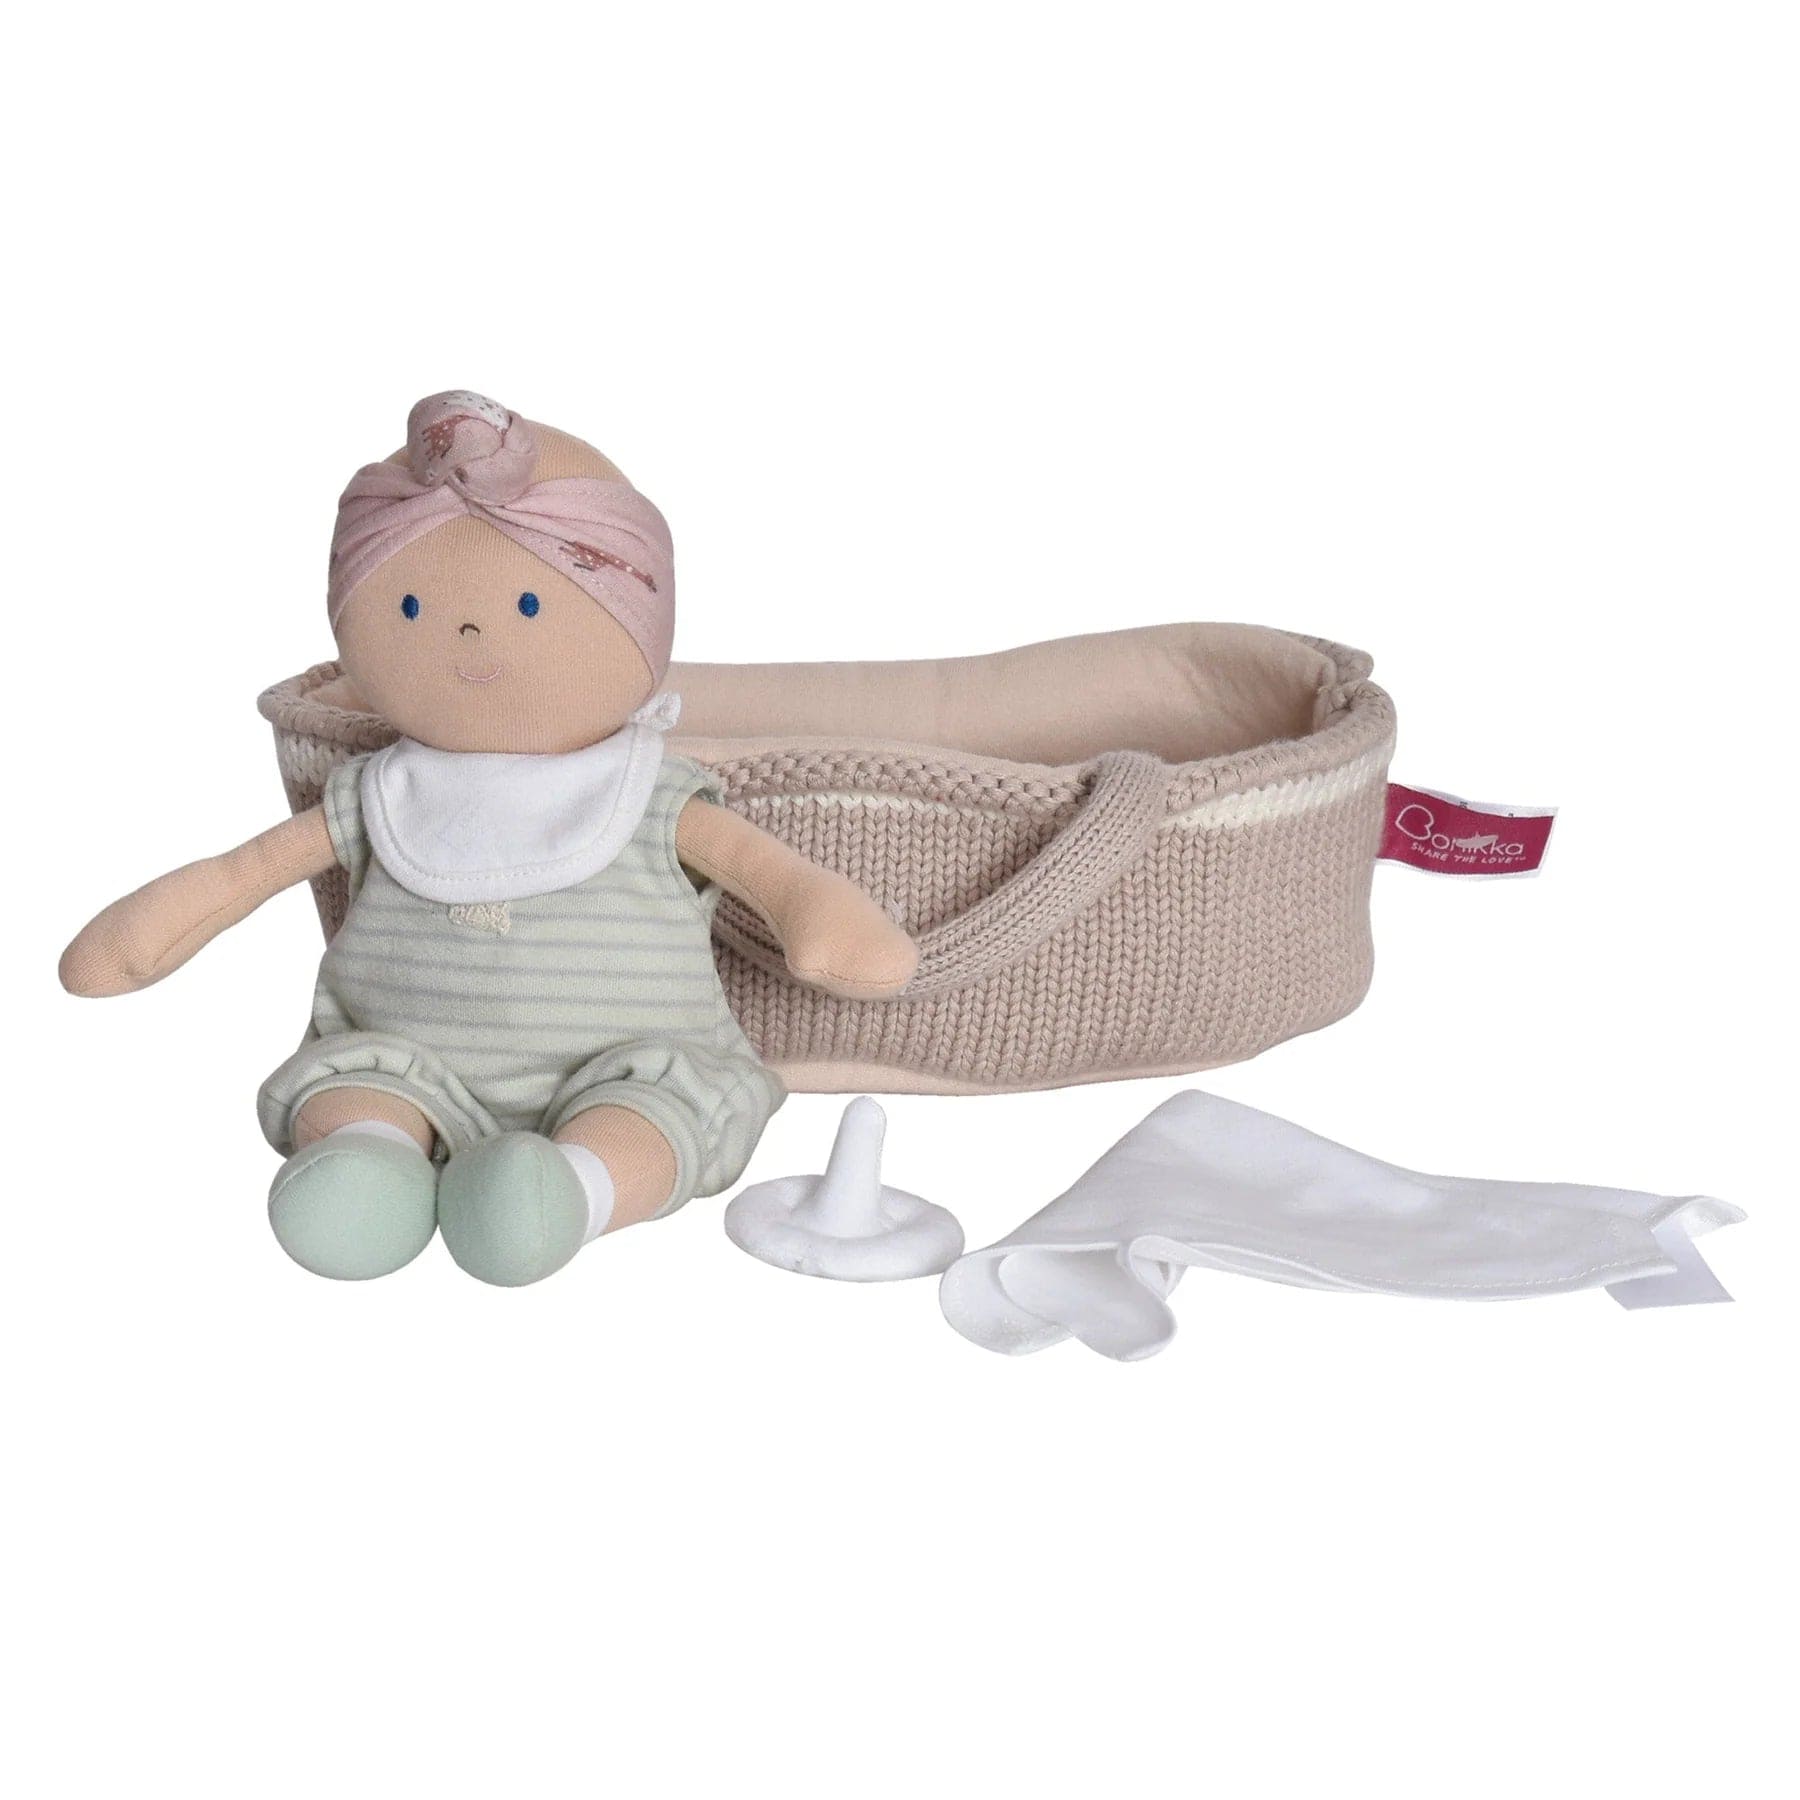 Bonikka Toys Remi Carry Cot, Knitted with Baby, Soother and Blanket